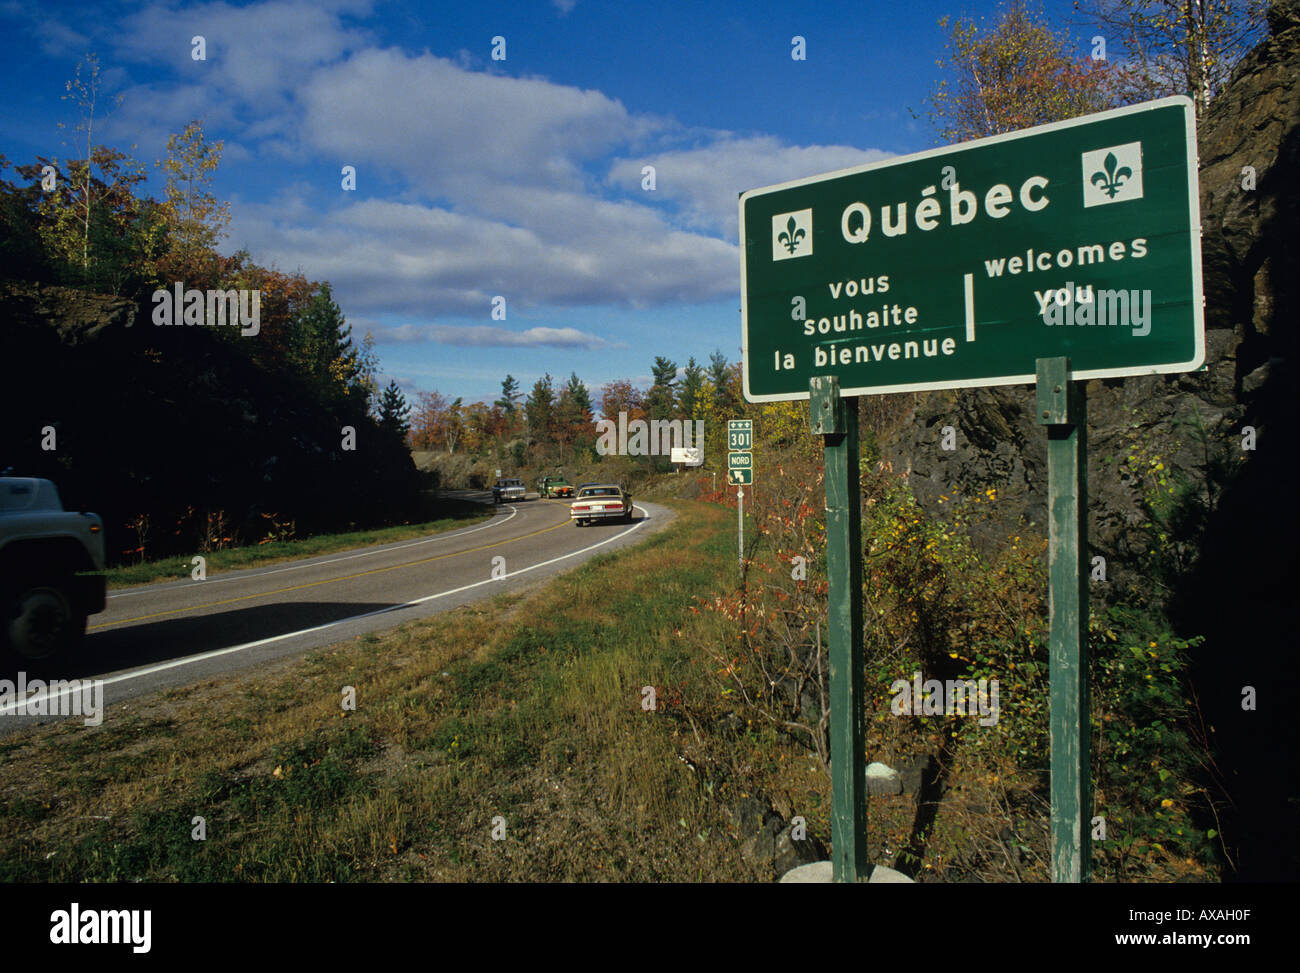 Roadside sing welcomes drivers to the Provence of Quebec in French and English near Portage du Fort CANADA Stock Photo